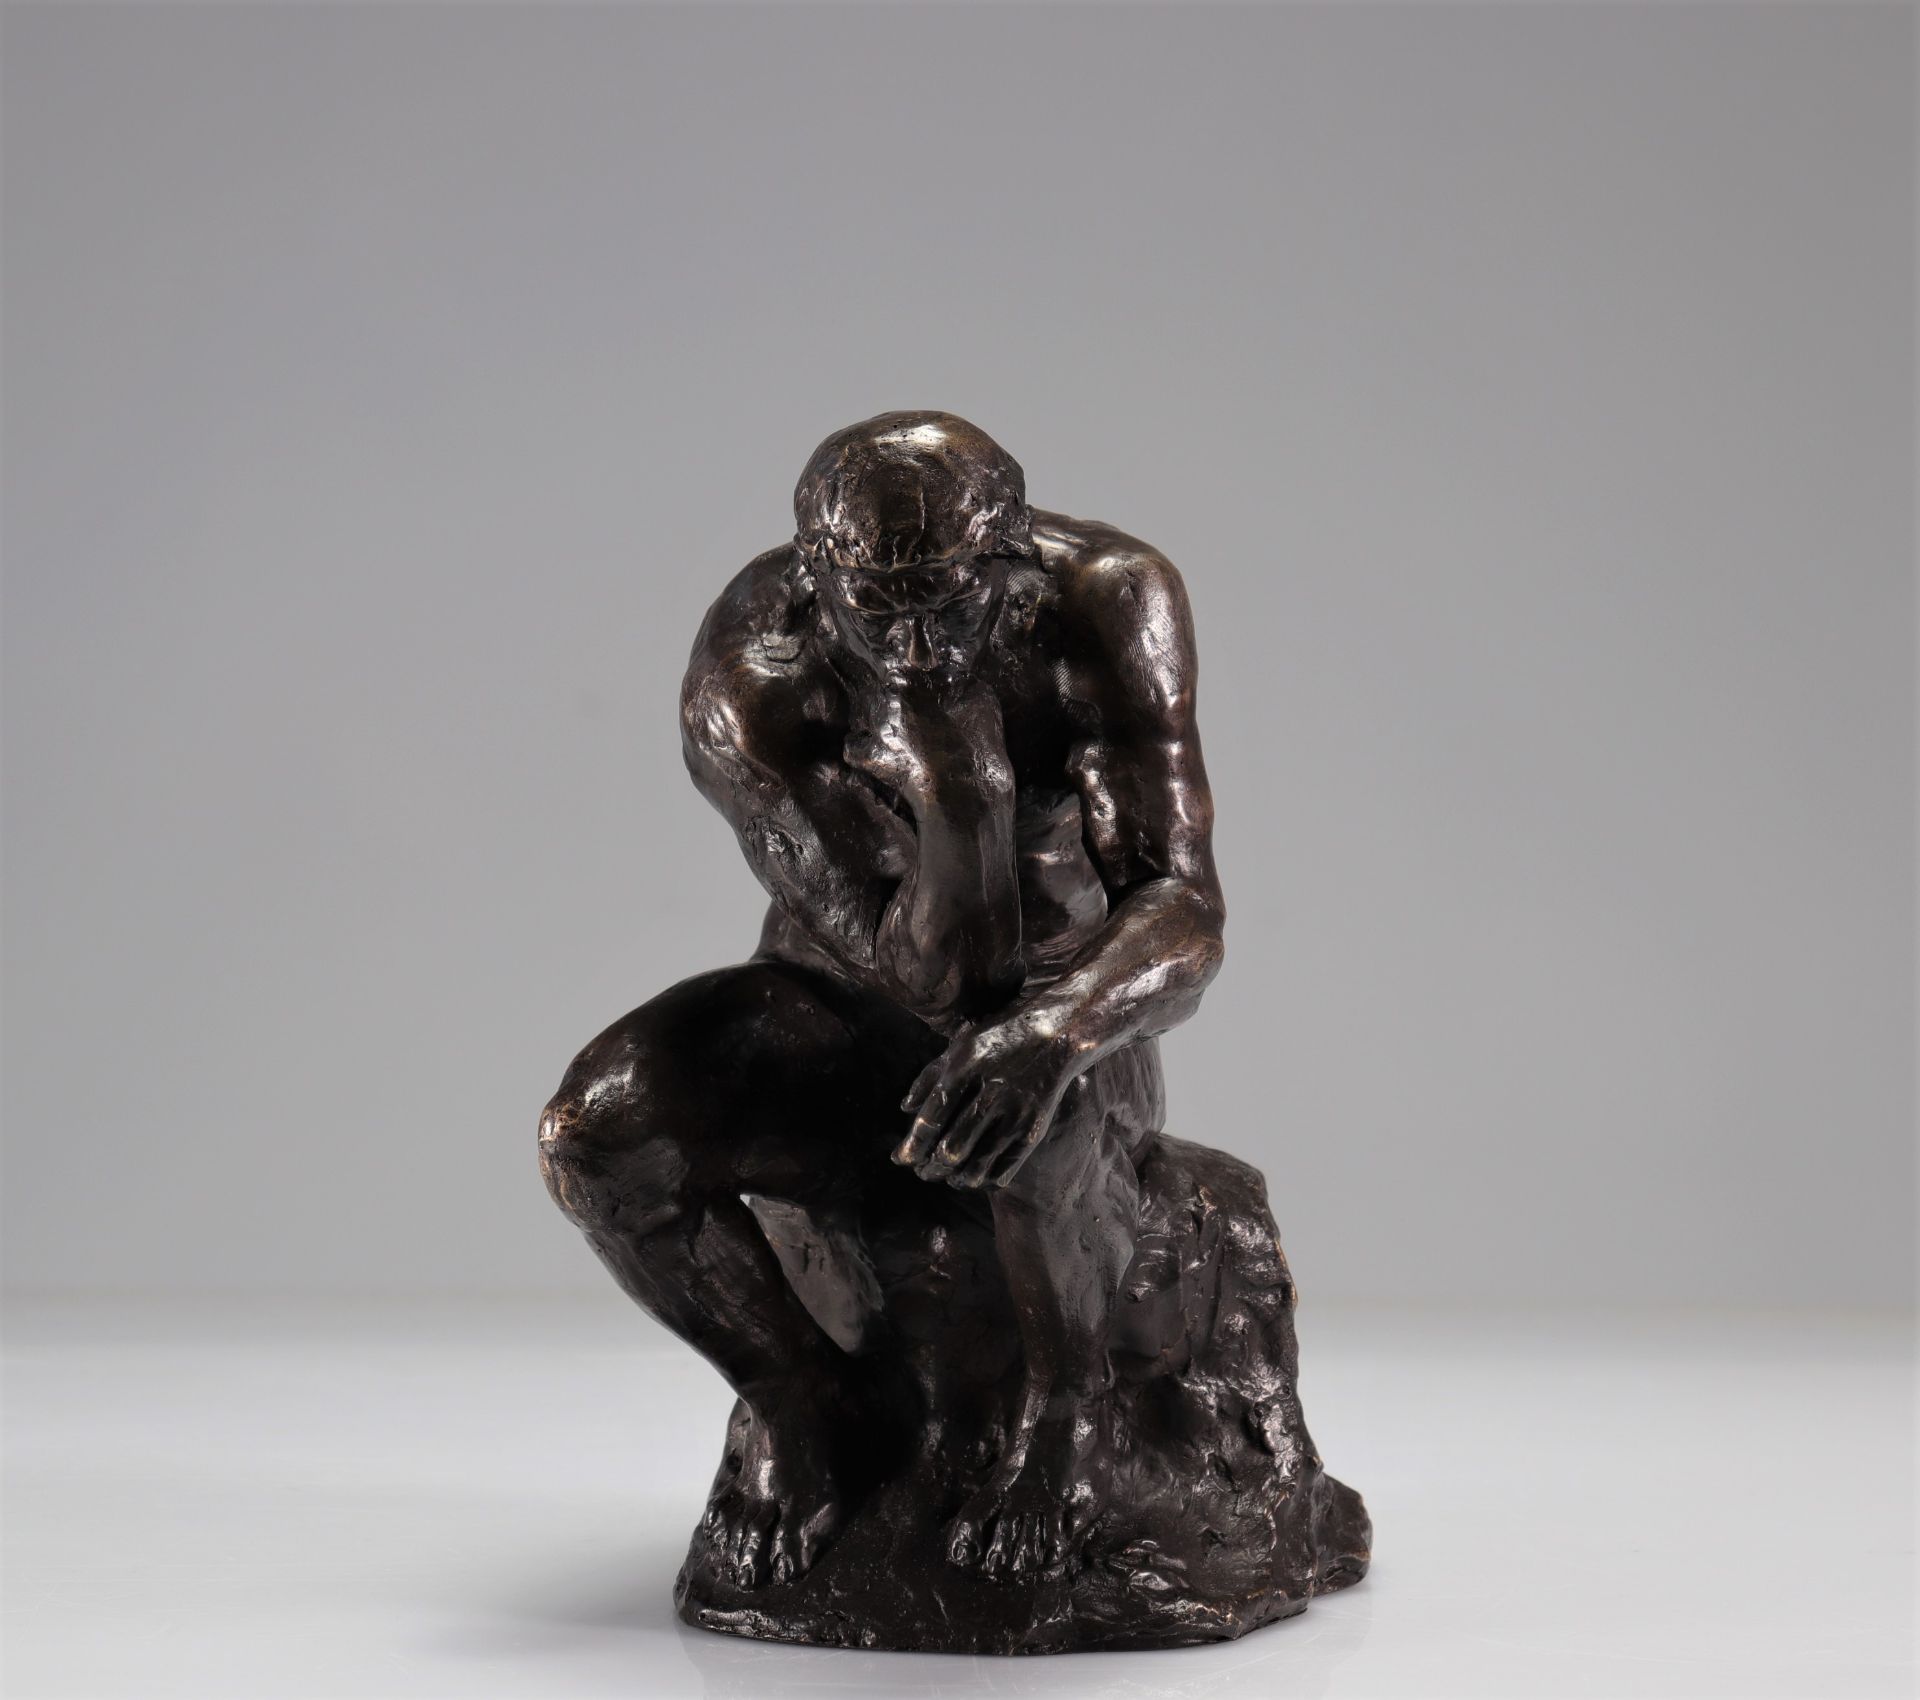 Auguste Rodin (After). " The Thinker ". Lost wax bronze with brown patina. Signed "Rodin" hollow. Be - Image 3 of 6